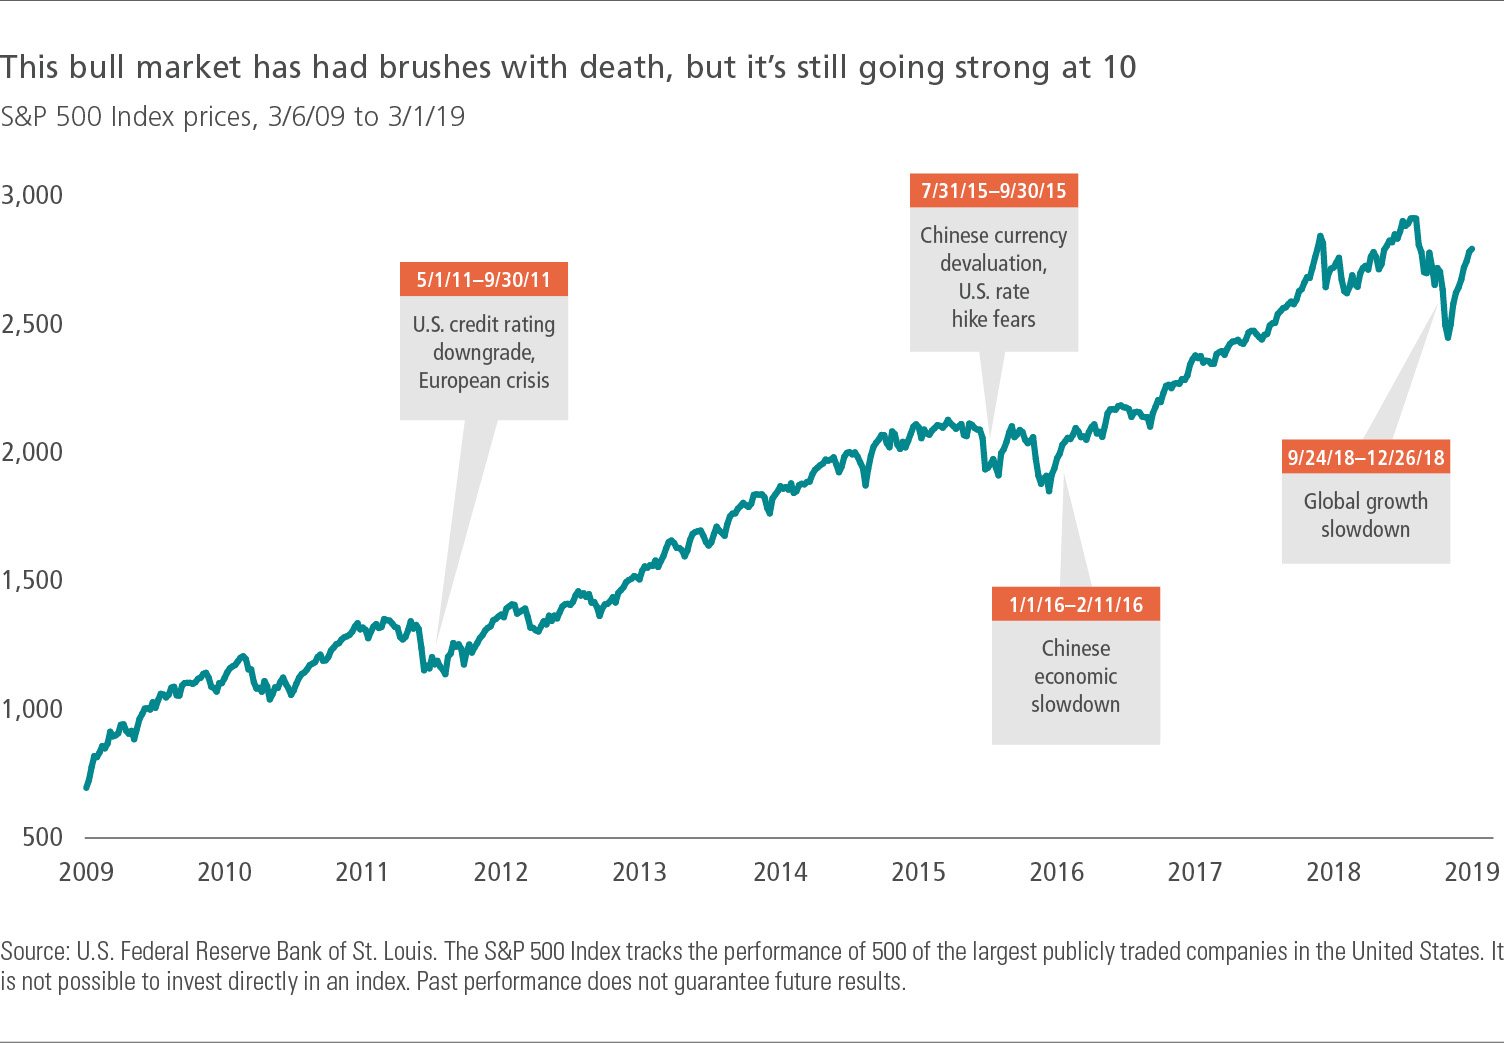 This bull market has had brushes with death, but it's still going strong at 10